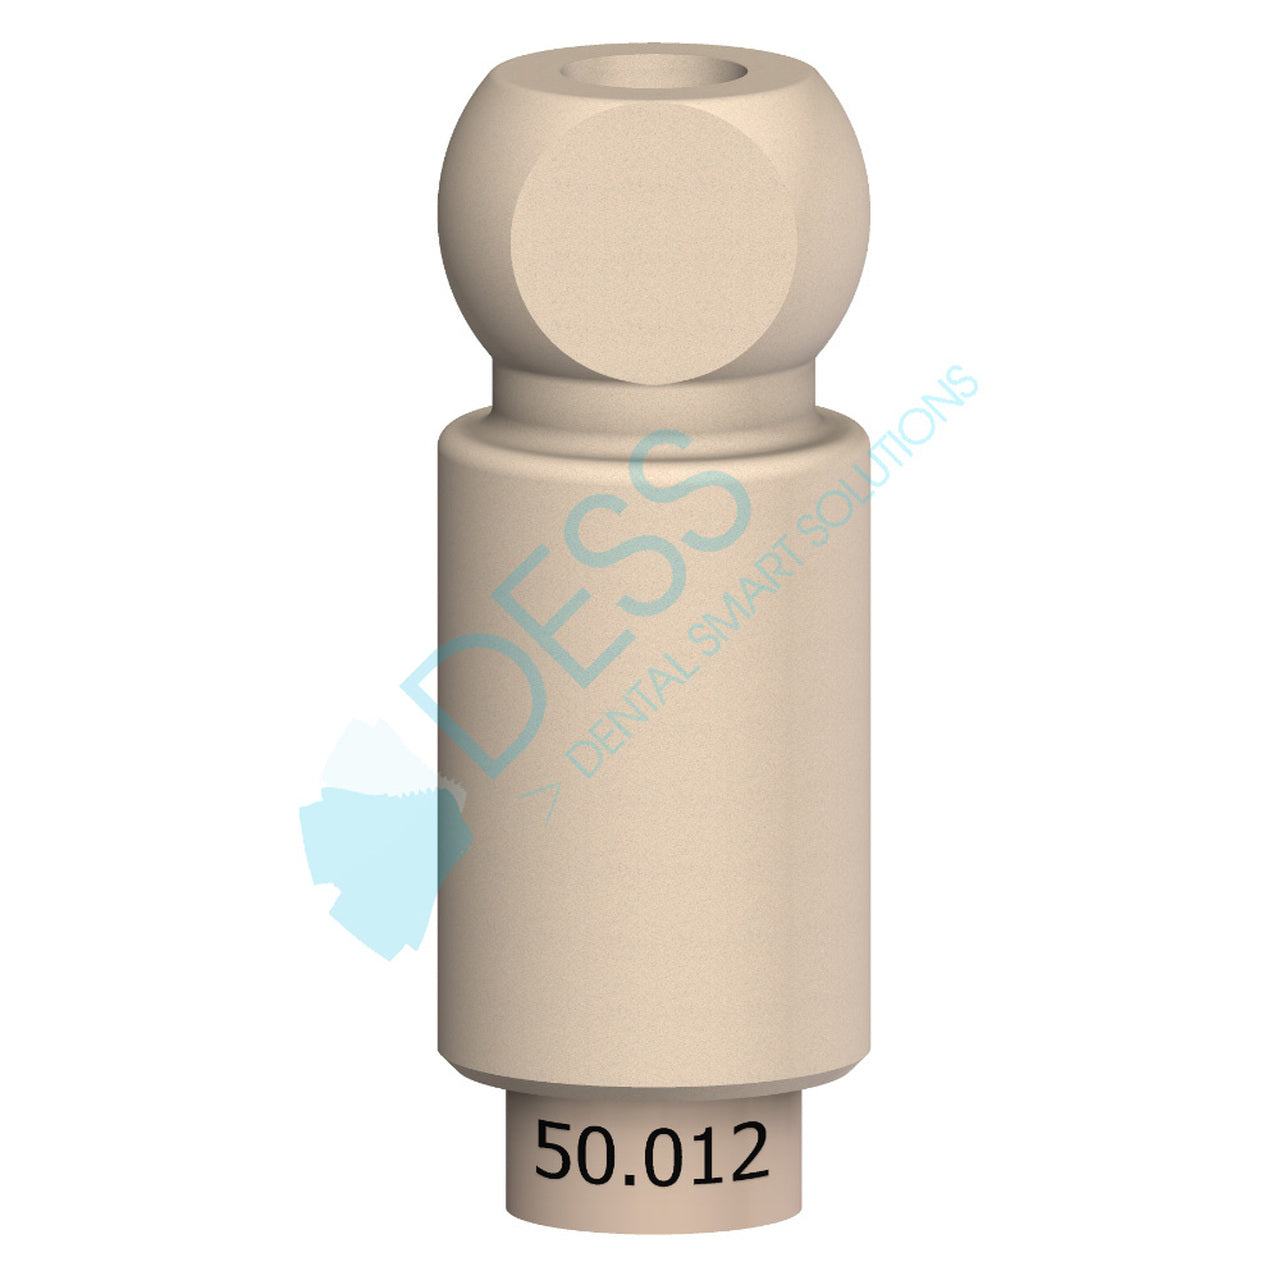 Scan abutment compatible with 3i Osseotite®